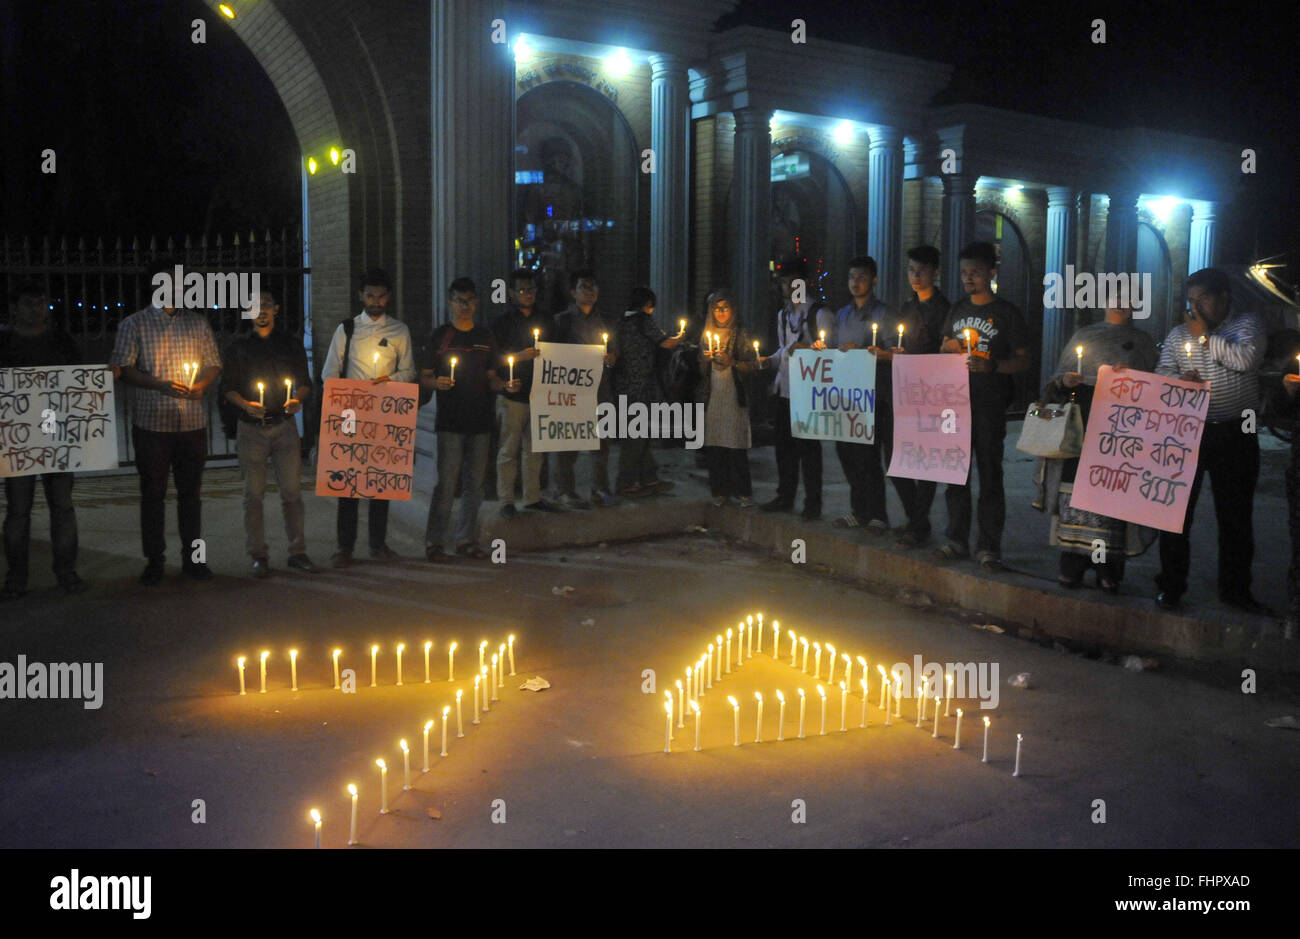 Dhaka, Bangladesh. 25th Feb, 2016. Bangladeshi students of several universities hold candles to mark the 7th anniversary of the BDR killing in Dhaka, Bangladesh, Feb. 25, 2016. The two-day horrendous mutiny of the Border Guard Bangladesh (BGB), previously known as Bangladesh Rifles (BDR), left 74 people dead including 57 officers deputed from the Army. © Shariful Islam/Xinhua/Alamy Live News Stock Photo